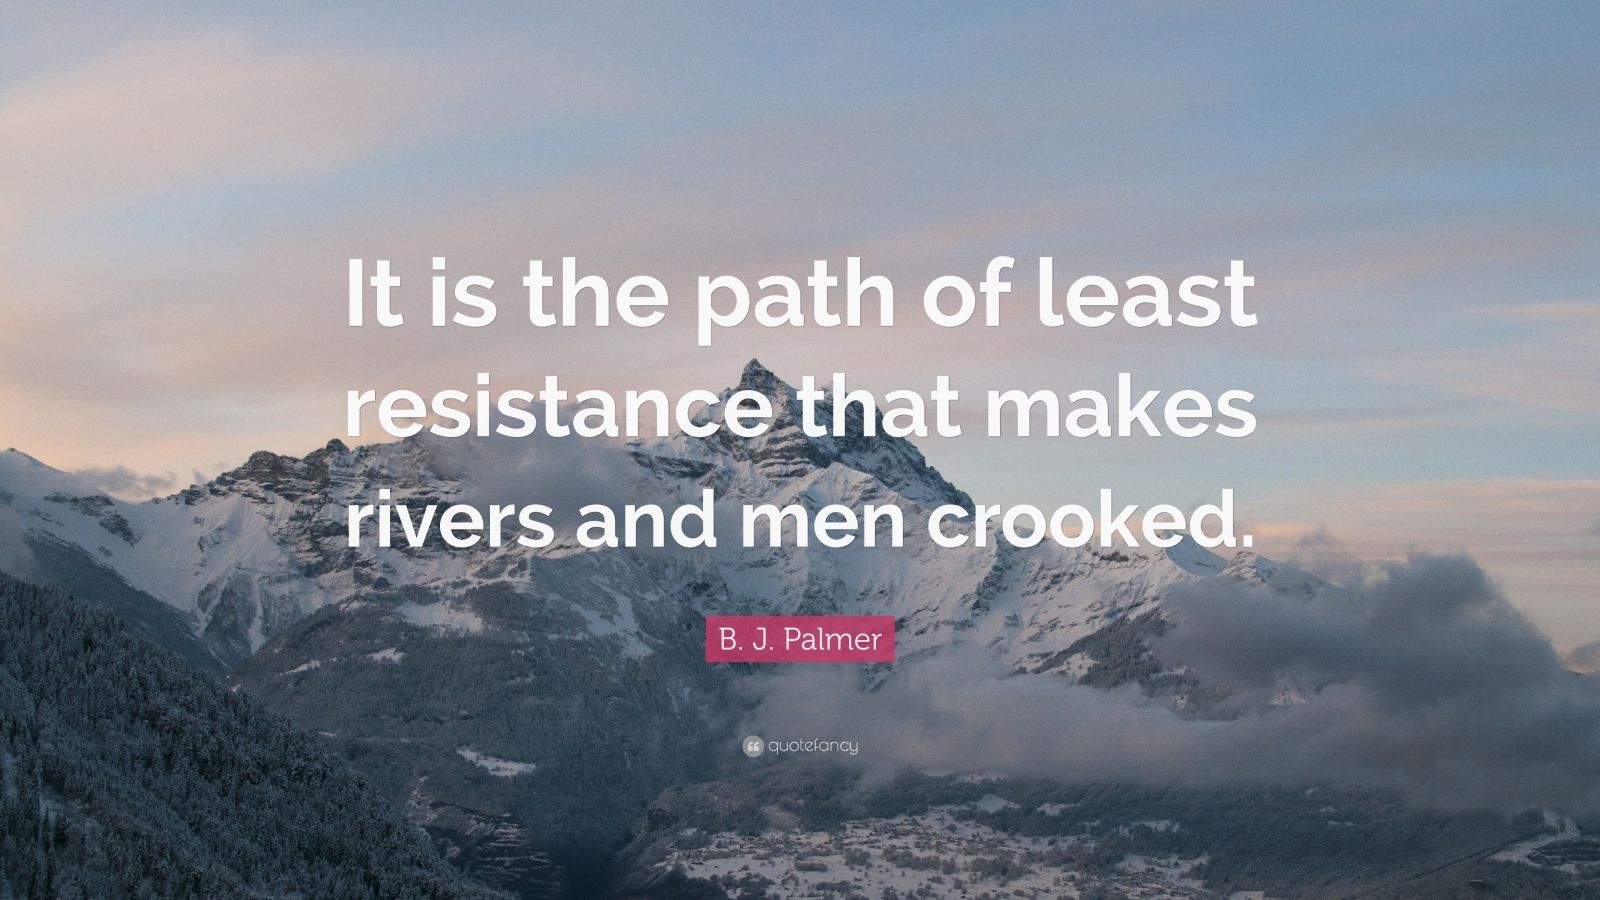 B. J. Palmer Quote: "It is the path of least resistance that makes rivers and men crooked." (12 ...